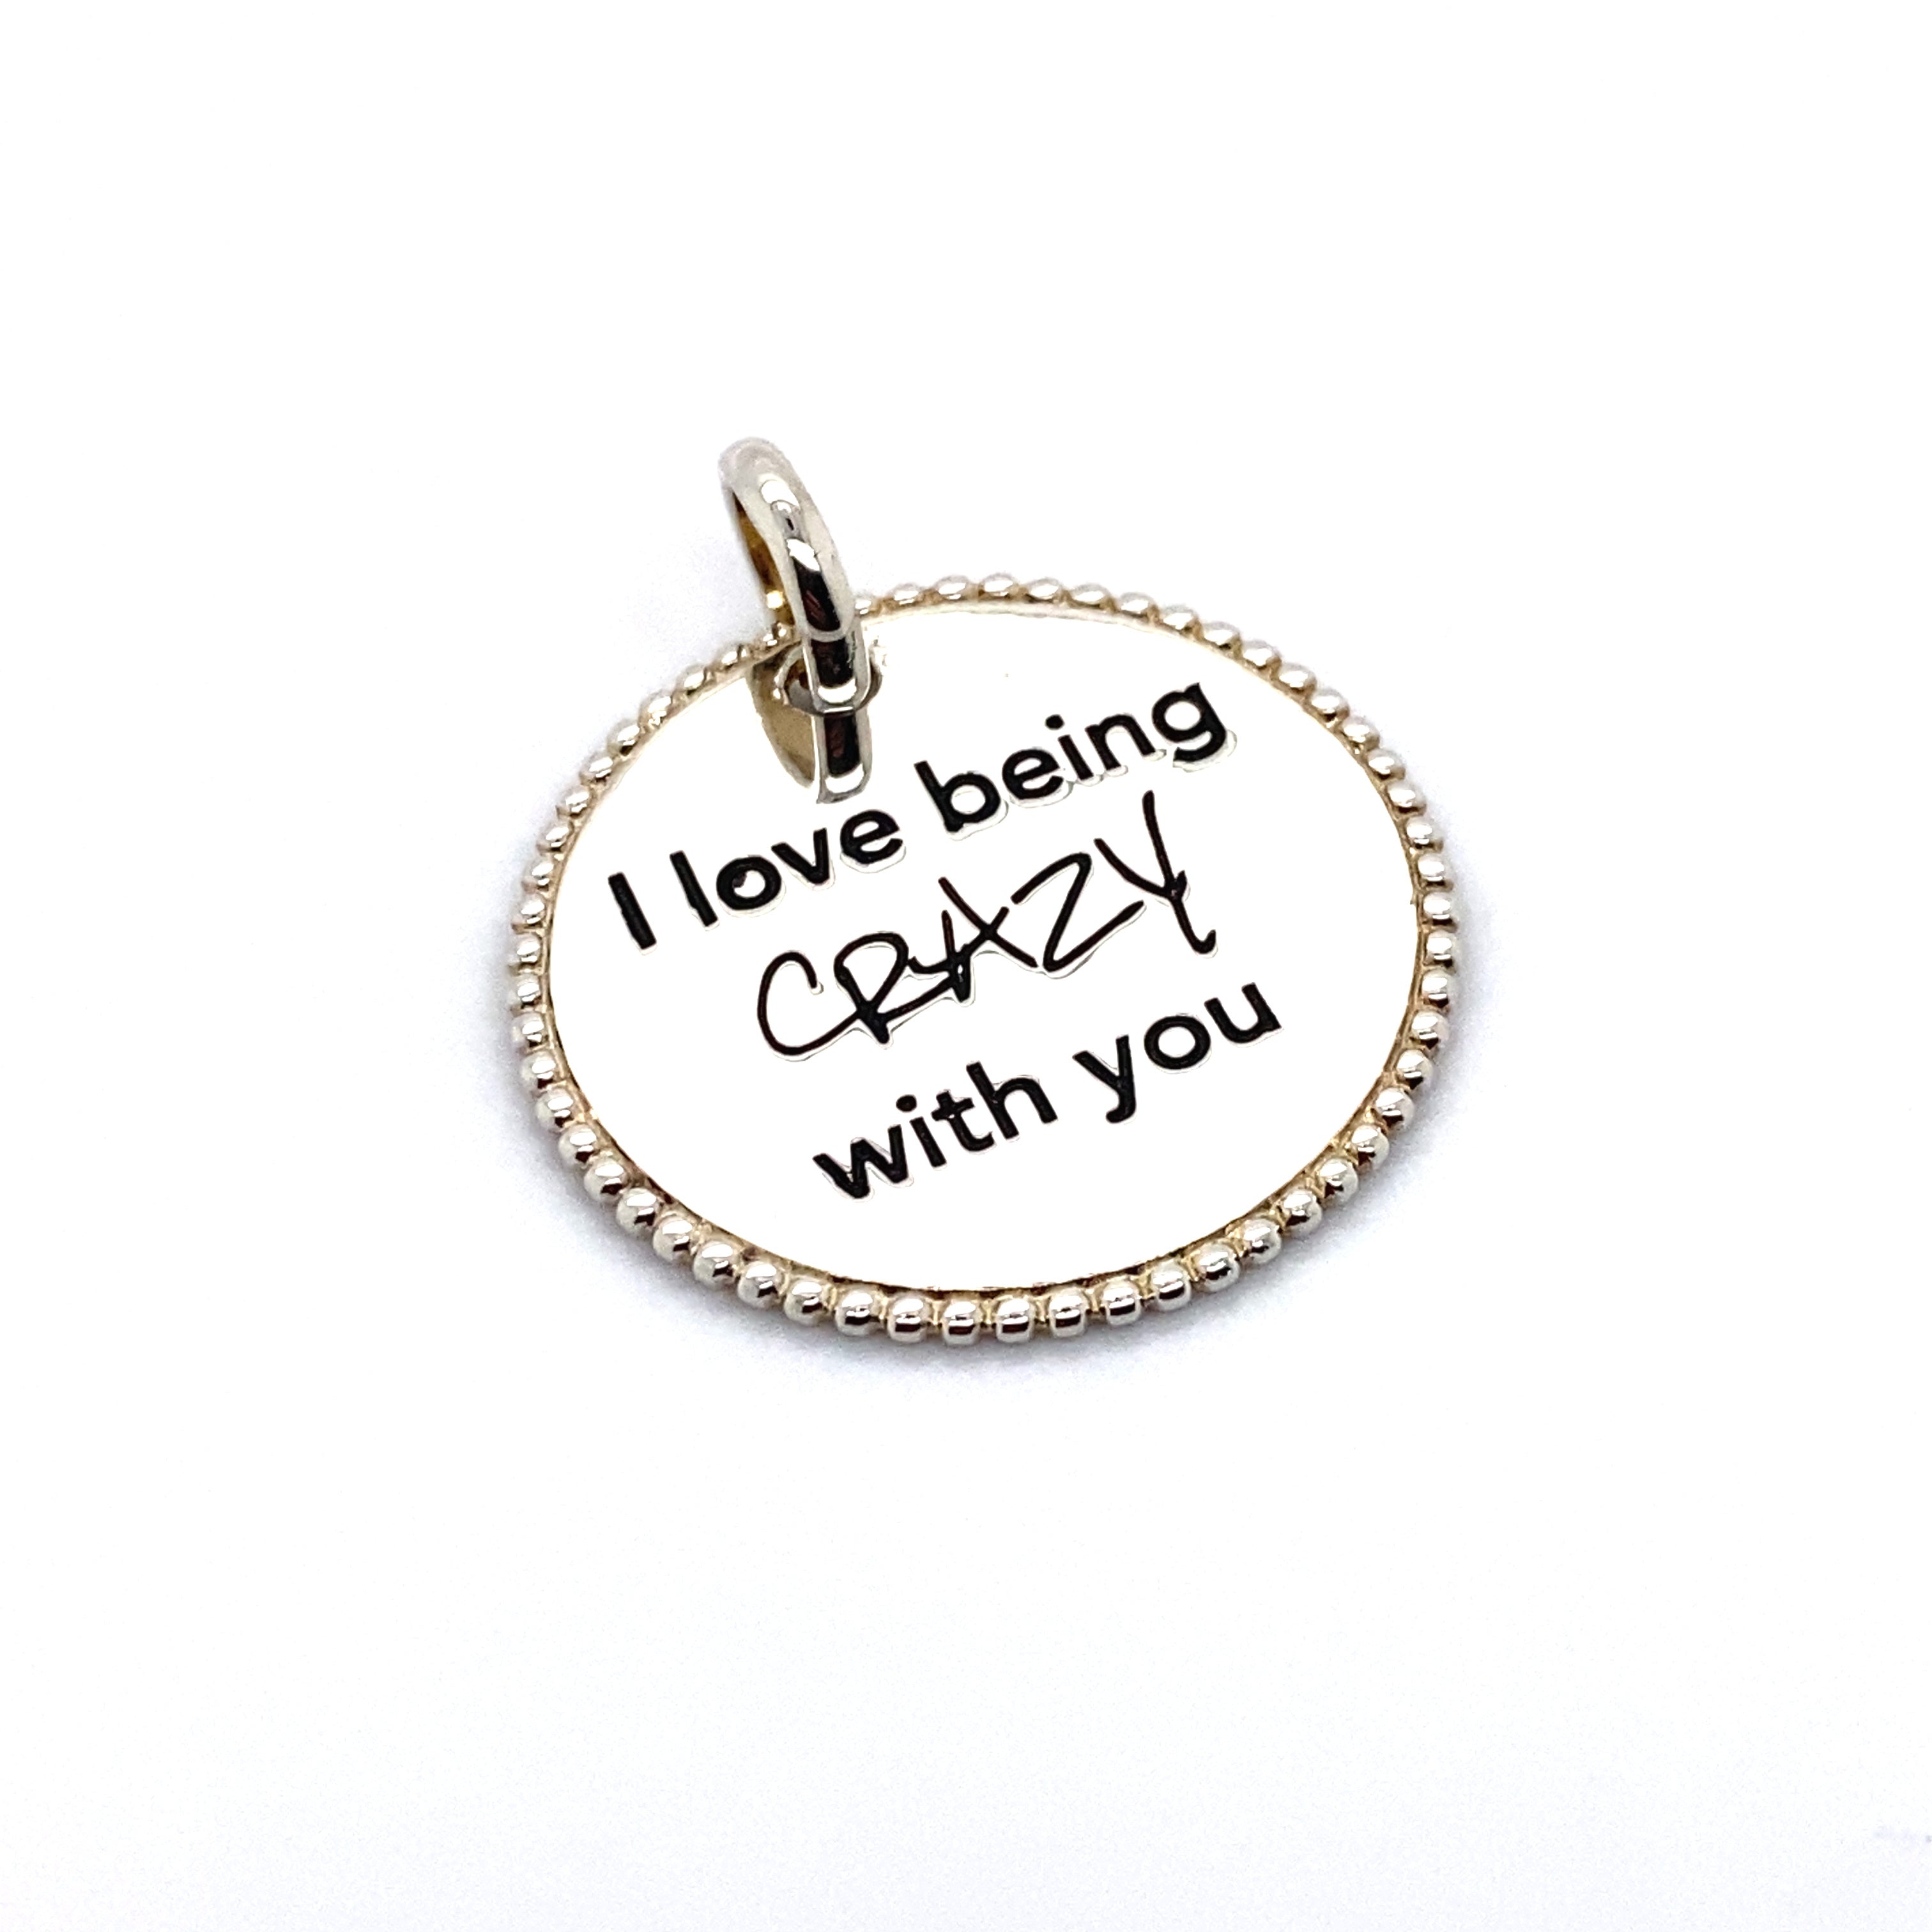 I love being crazy with you pendant Charm